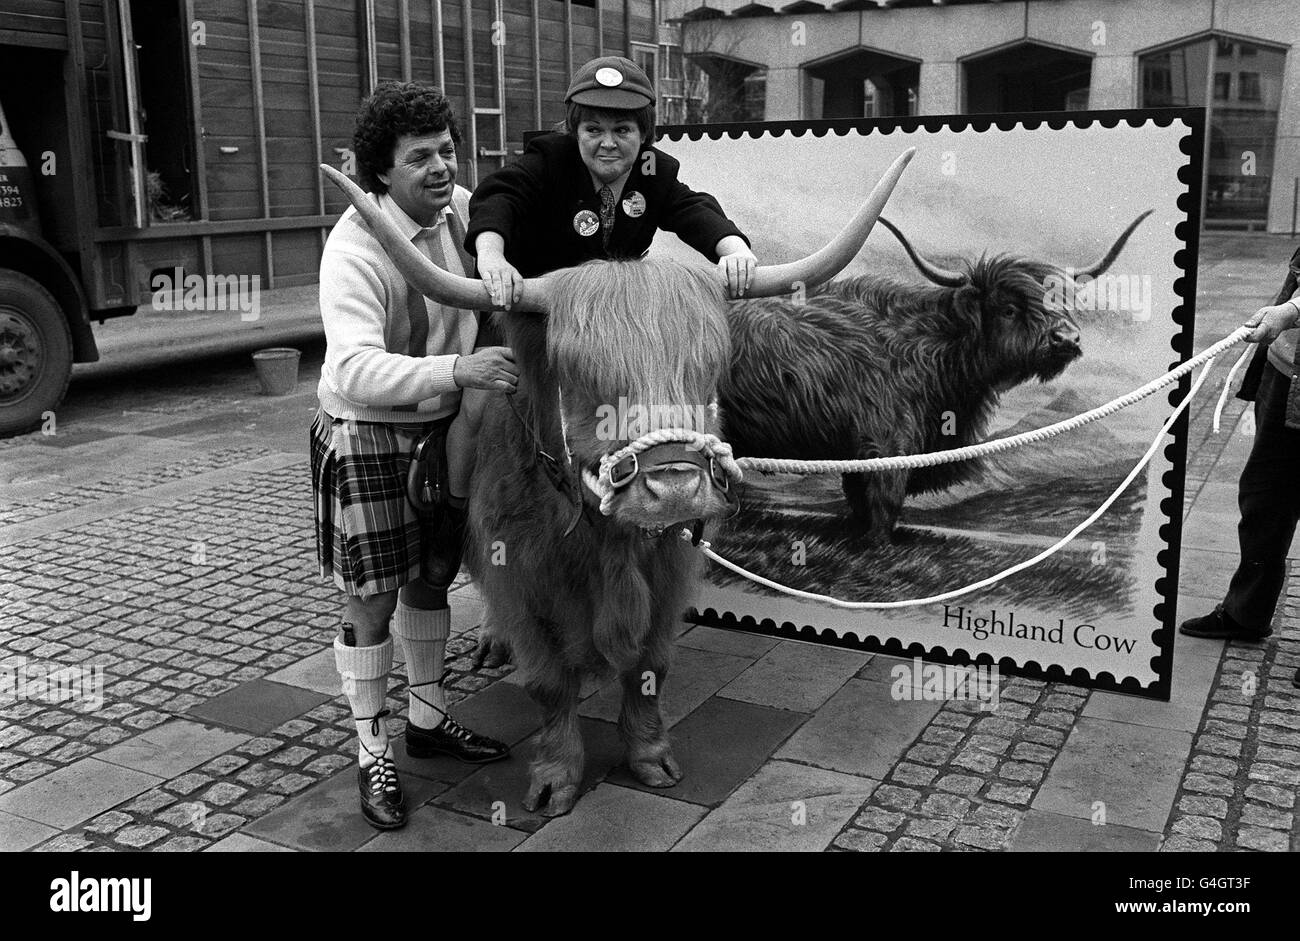 PA NEWS PHOTO 5/3/84  A LIBRARY PHOTO OF THE KRANKIES: IAN AND JEANETTE KRANKIE, THE HUSBAND AND WIFE COMEDY TEAM IN LONDON TO PROMOTE THE HIGHLAND COW NEW STAMP ISSUE. 15/12/04: Janette Tough (right), better known as Jimmy Krankie was taken to hospital after falling 20ft from a giant beanstalk during a Christmas pantomime at the Pavilion Theatre in Glasgow. Stock Photo